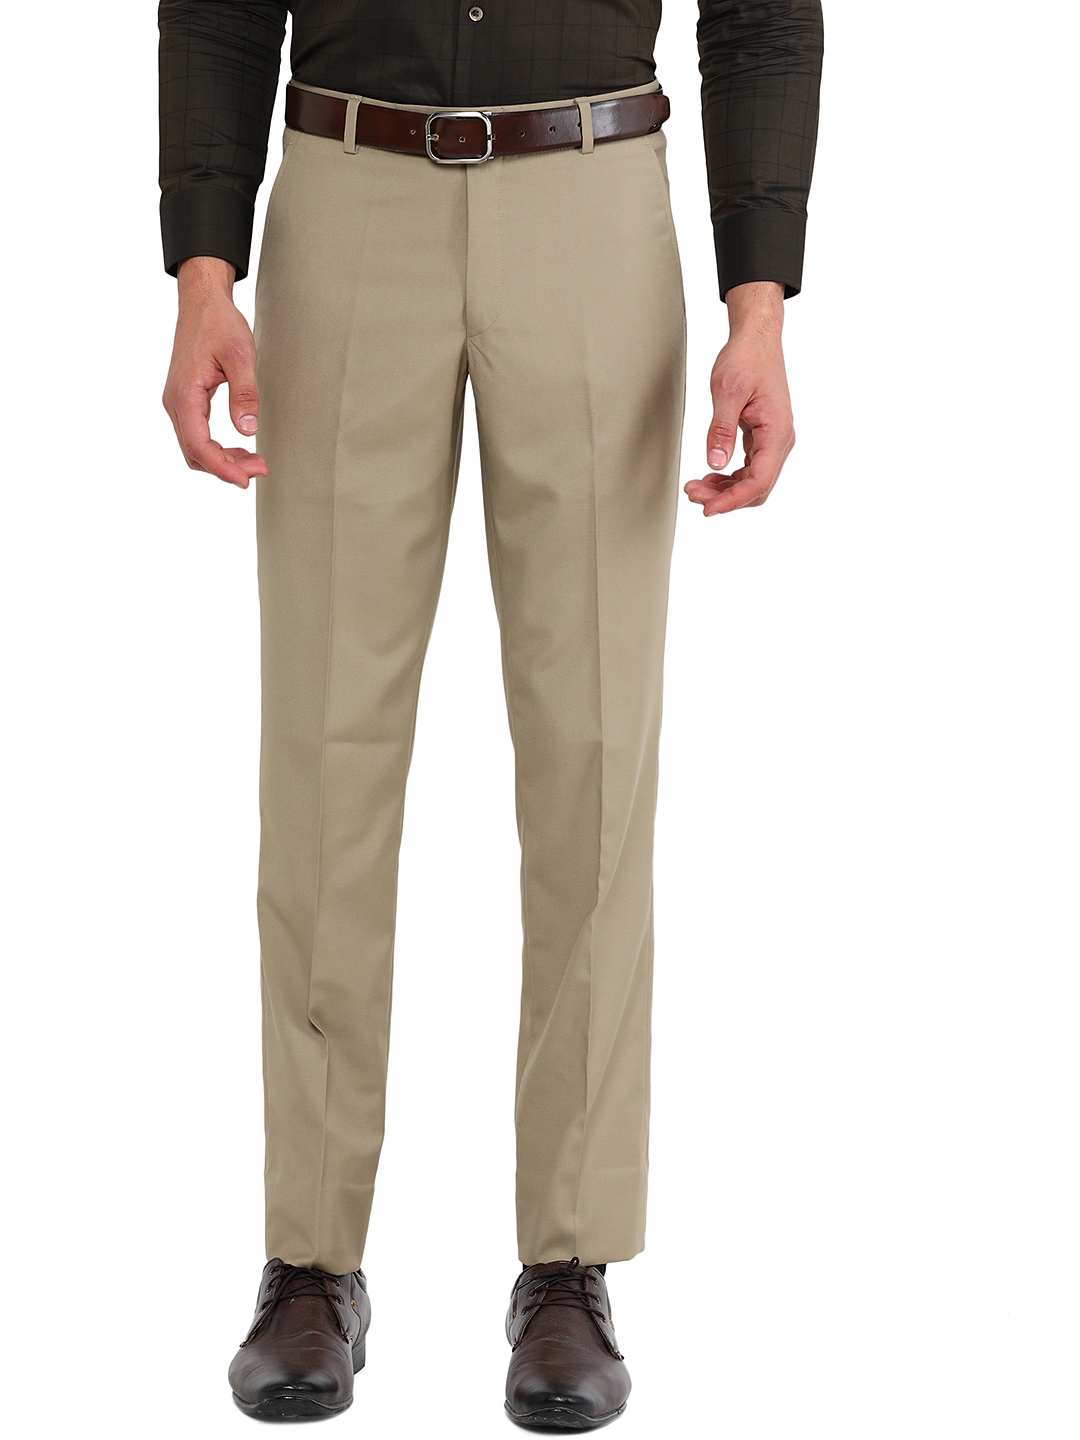 Greenfibre | Fawn Solid Slim Fit Formal Trouser | Greenfibre 0